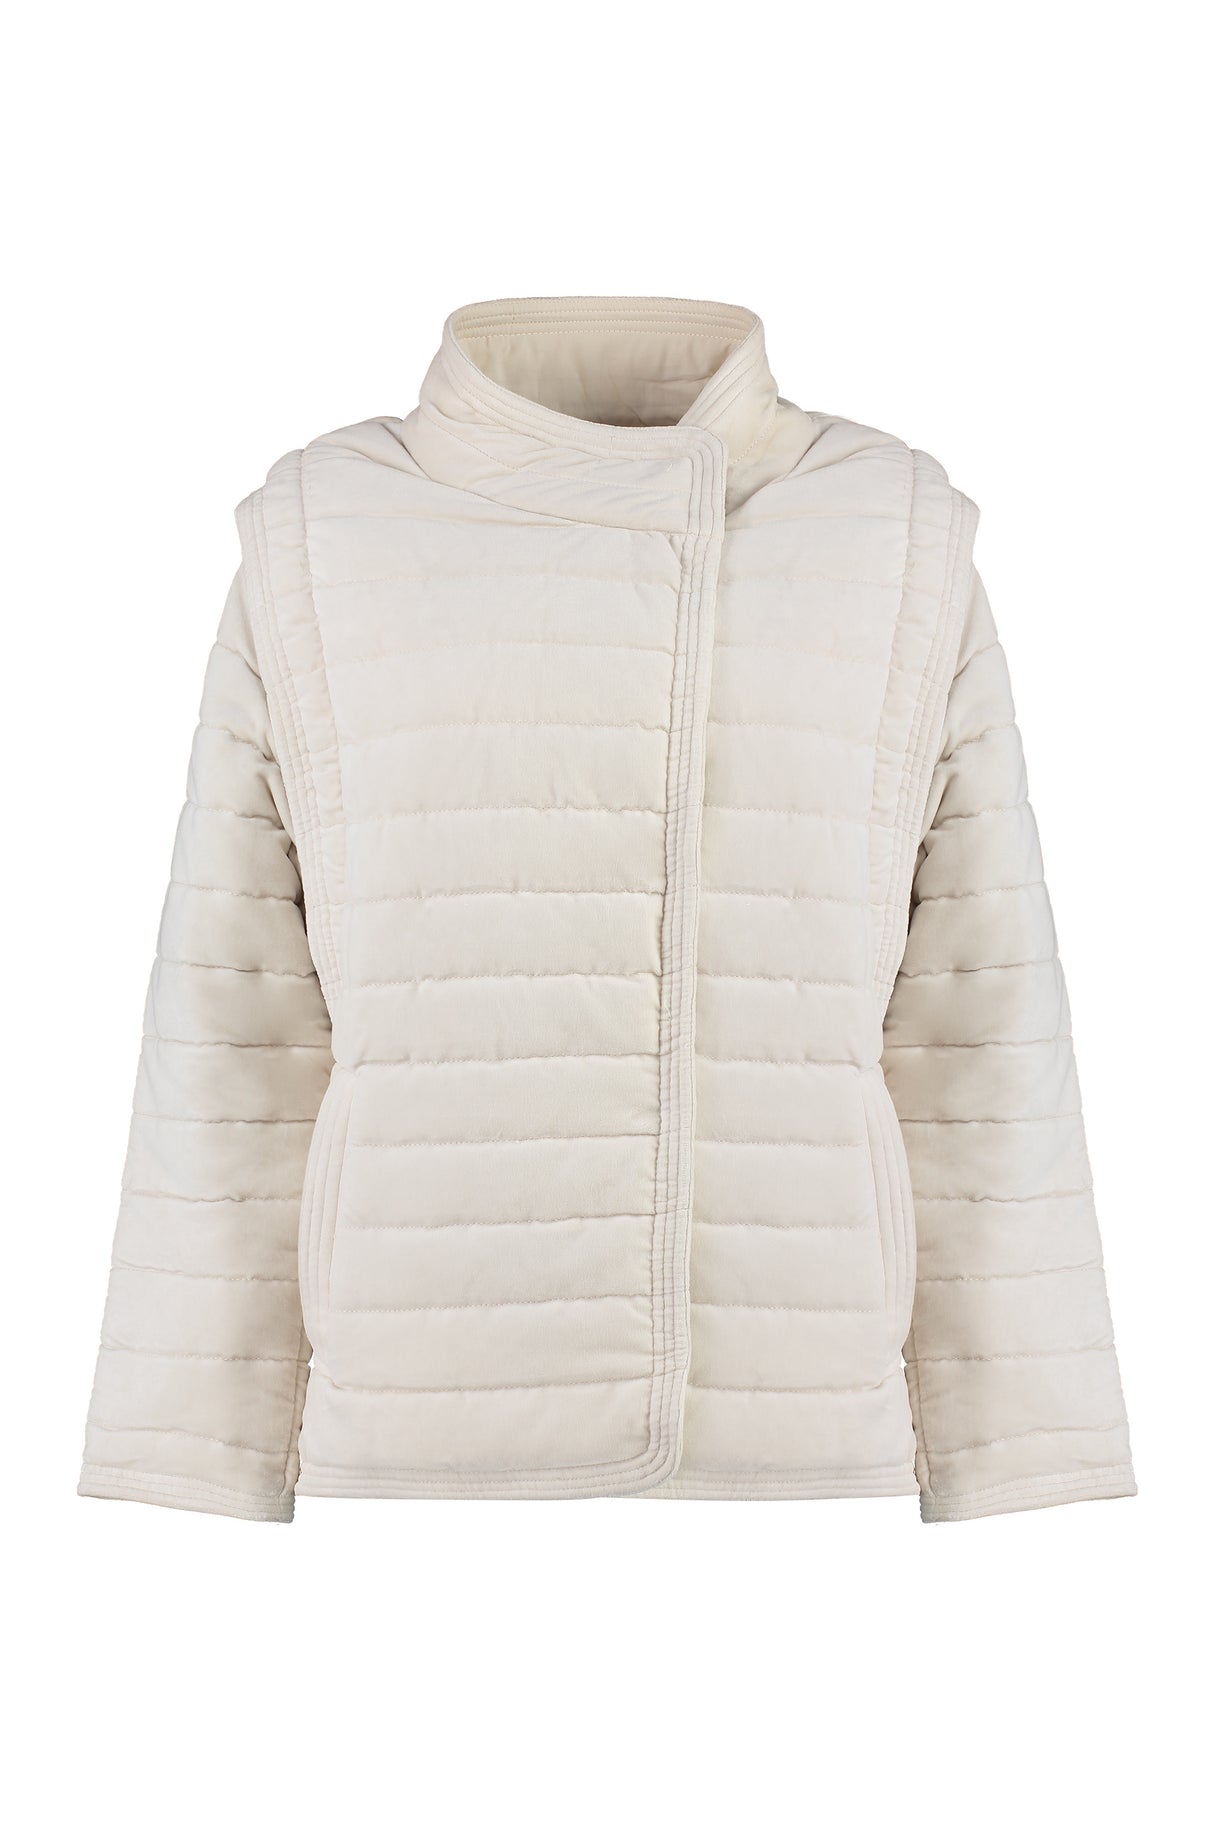 ISABEL MARANT ETOILE Ecru Padded Jacket with Removable Sleeves for Women